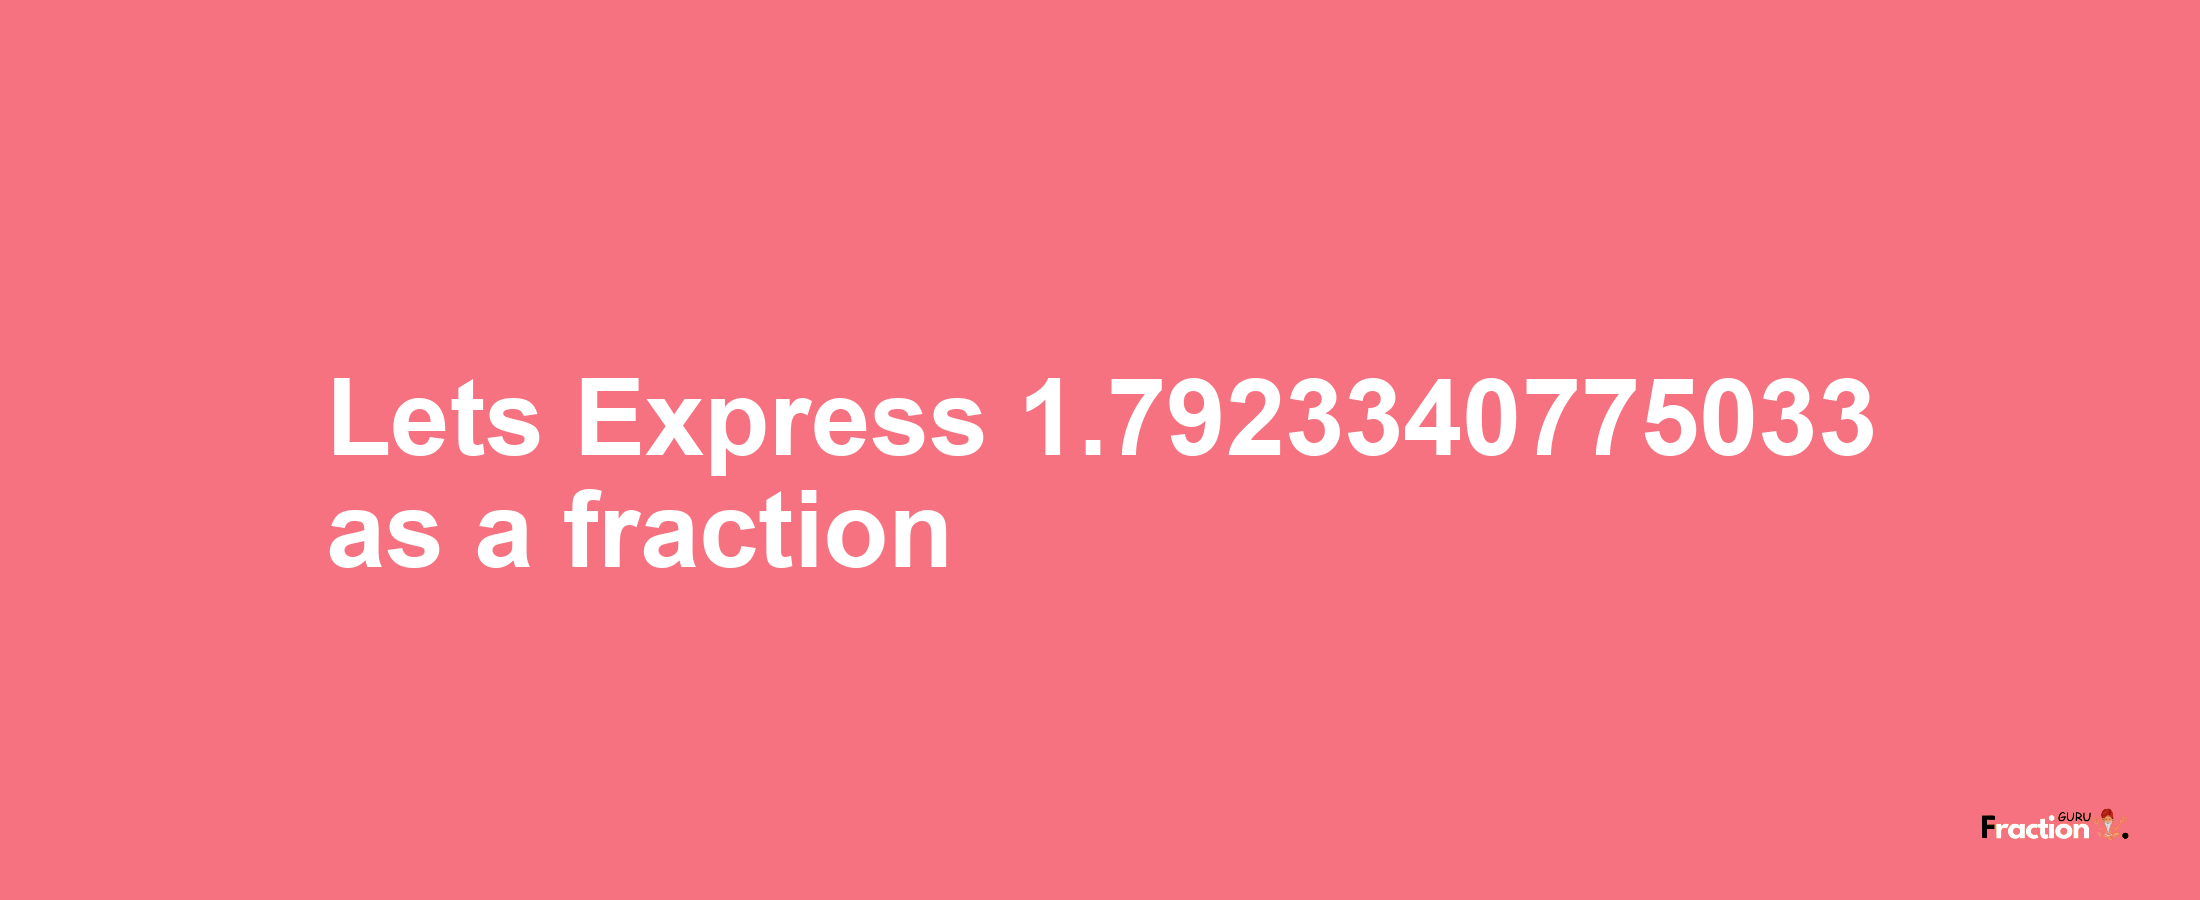 Lets Express 1.7923340775033 as afraction